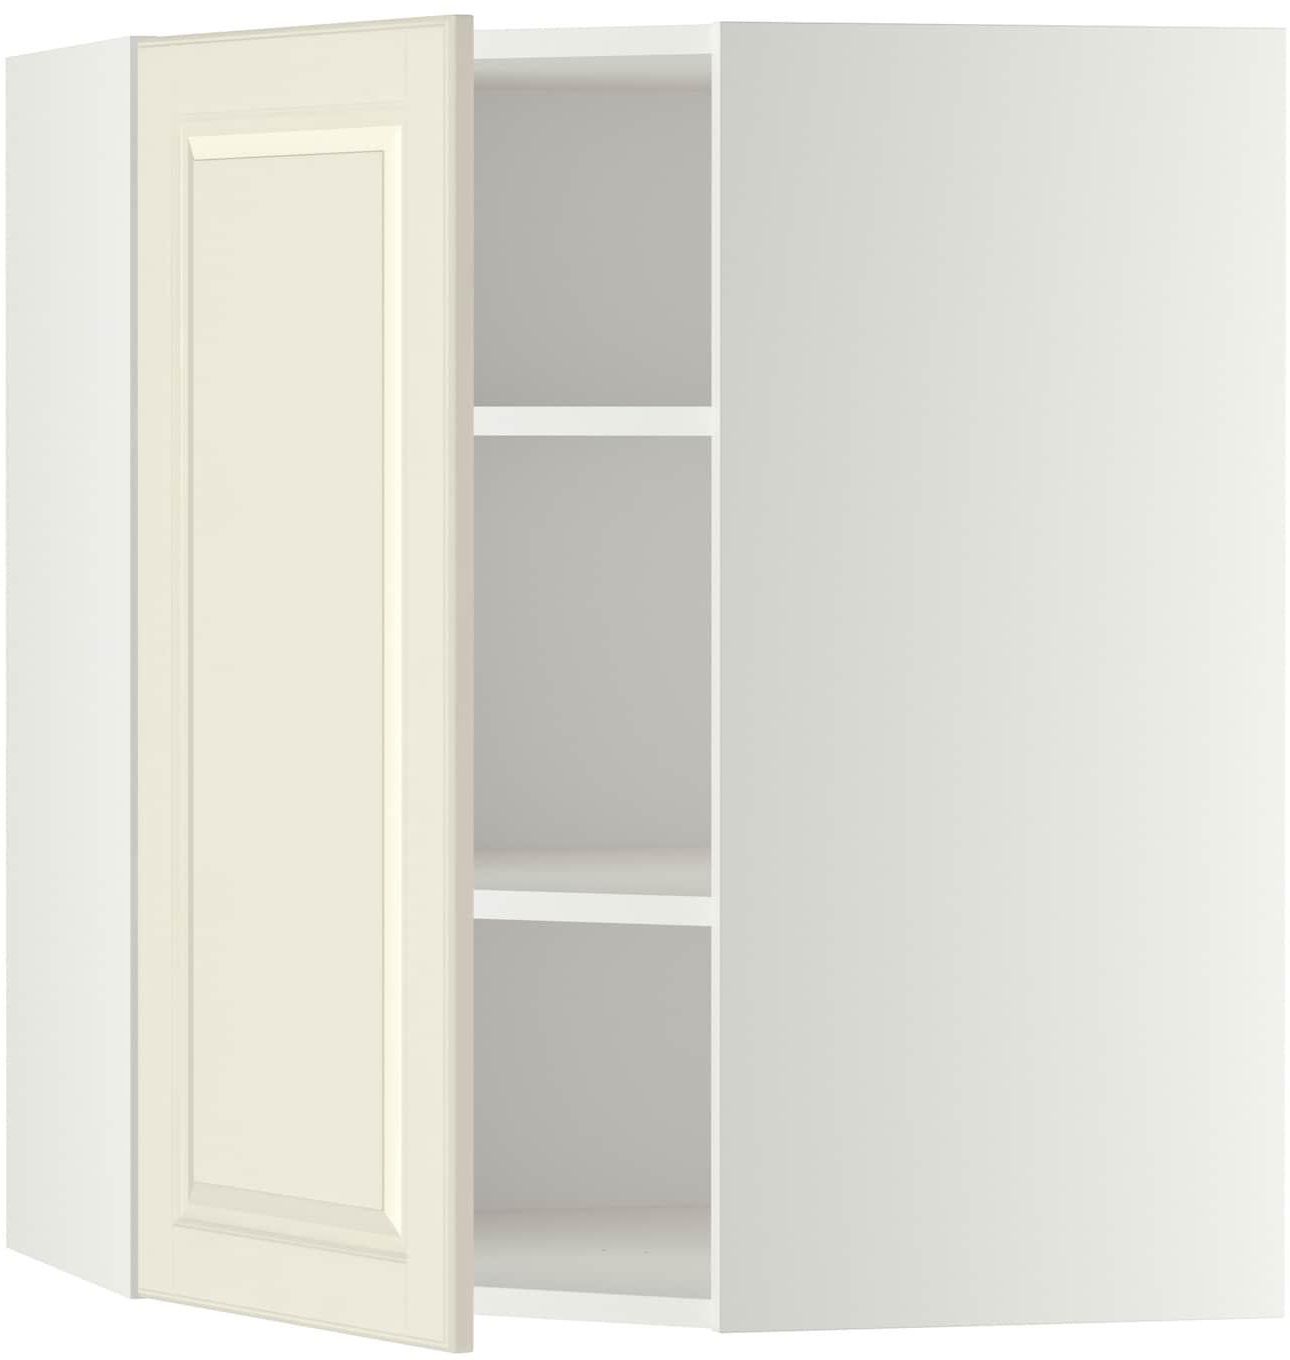 METOD Corner wall cabinet with shelves - white/Bodbyn off-white 68x80 cm